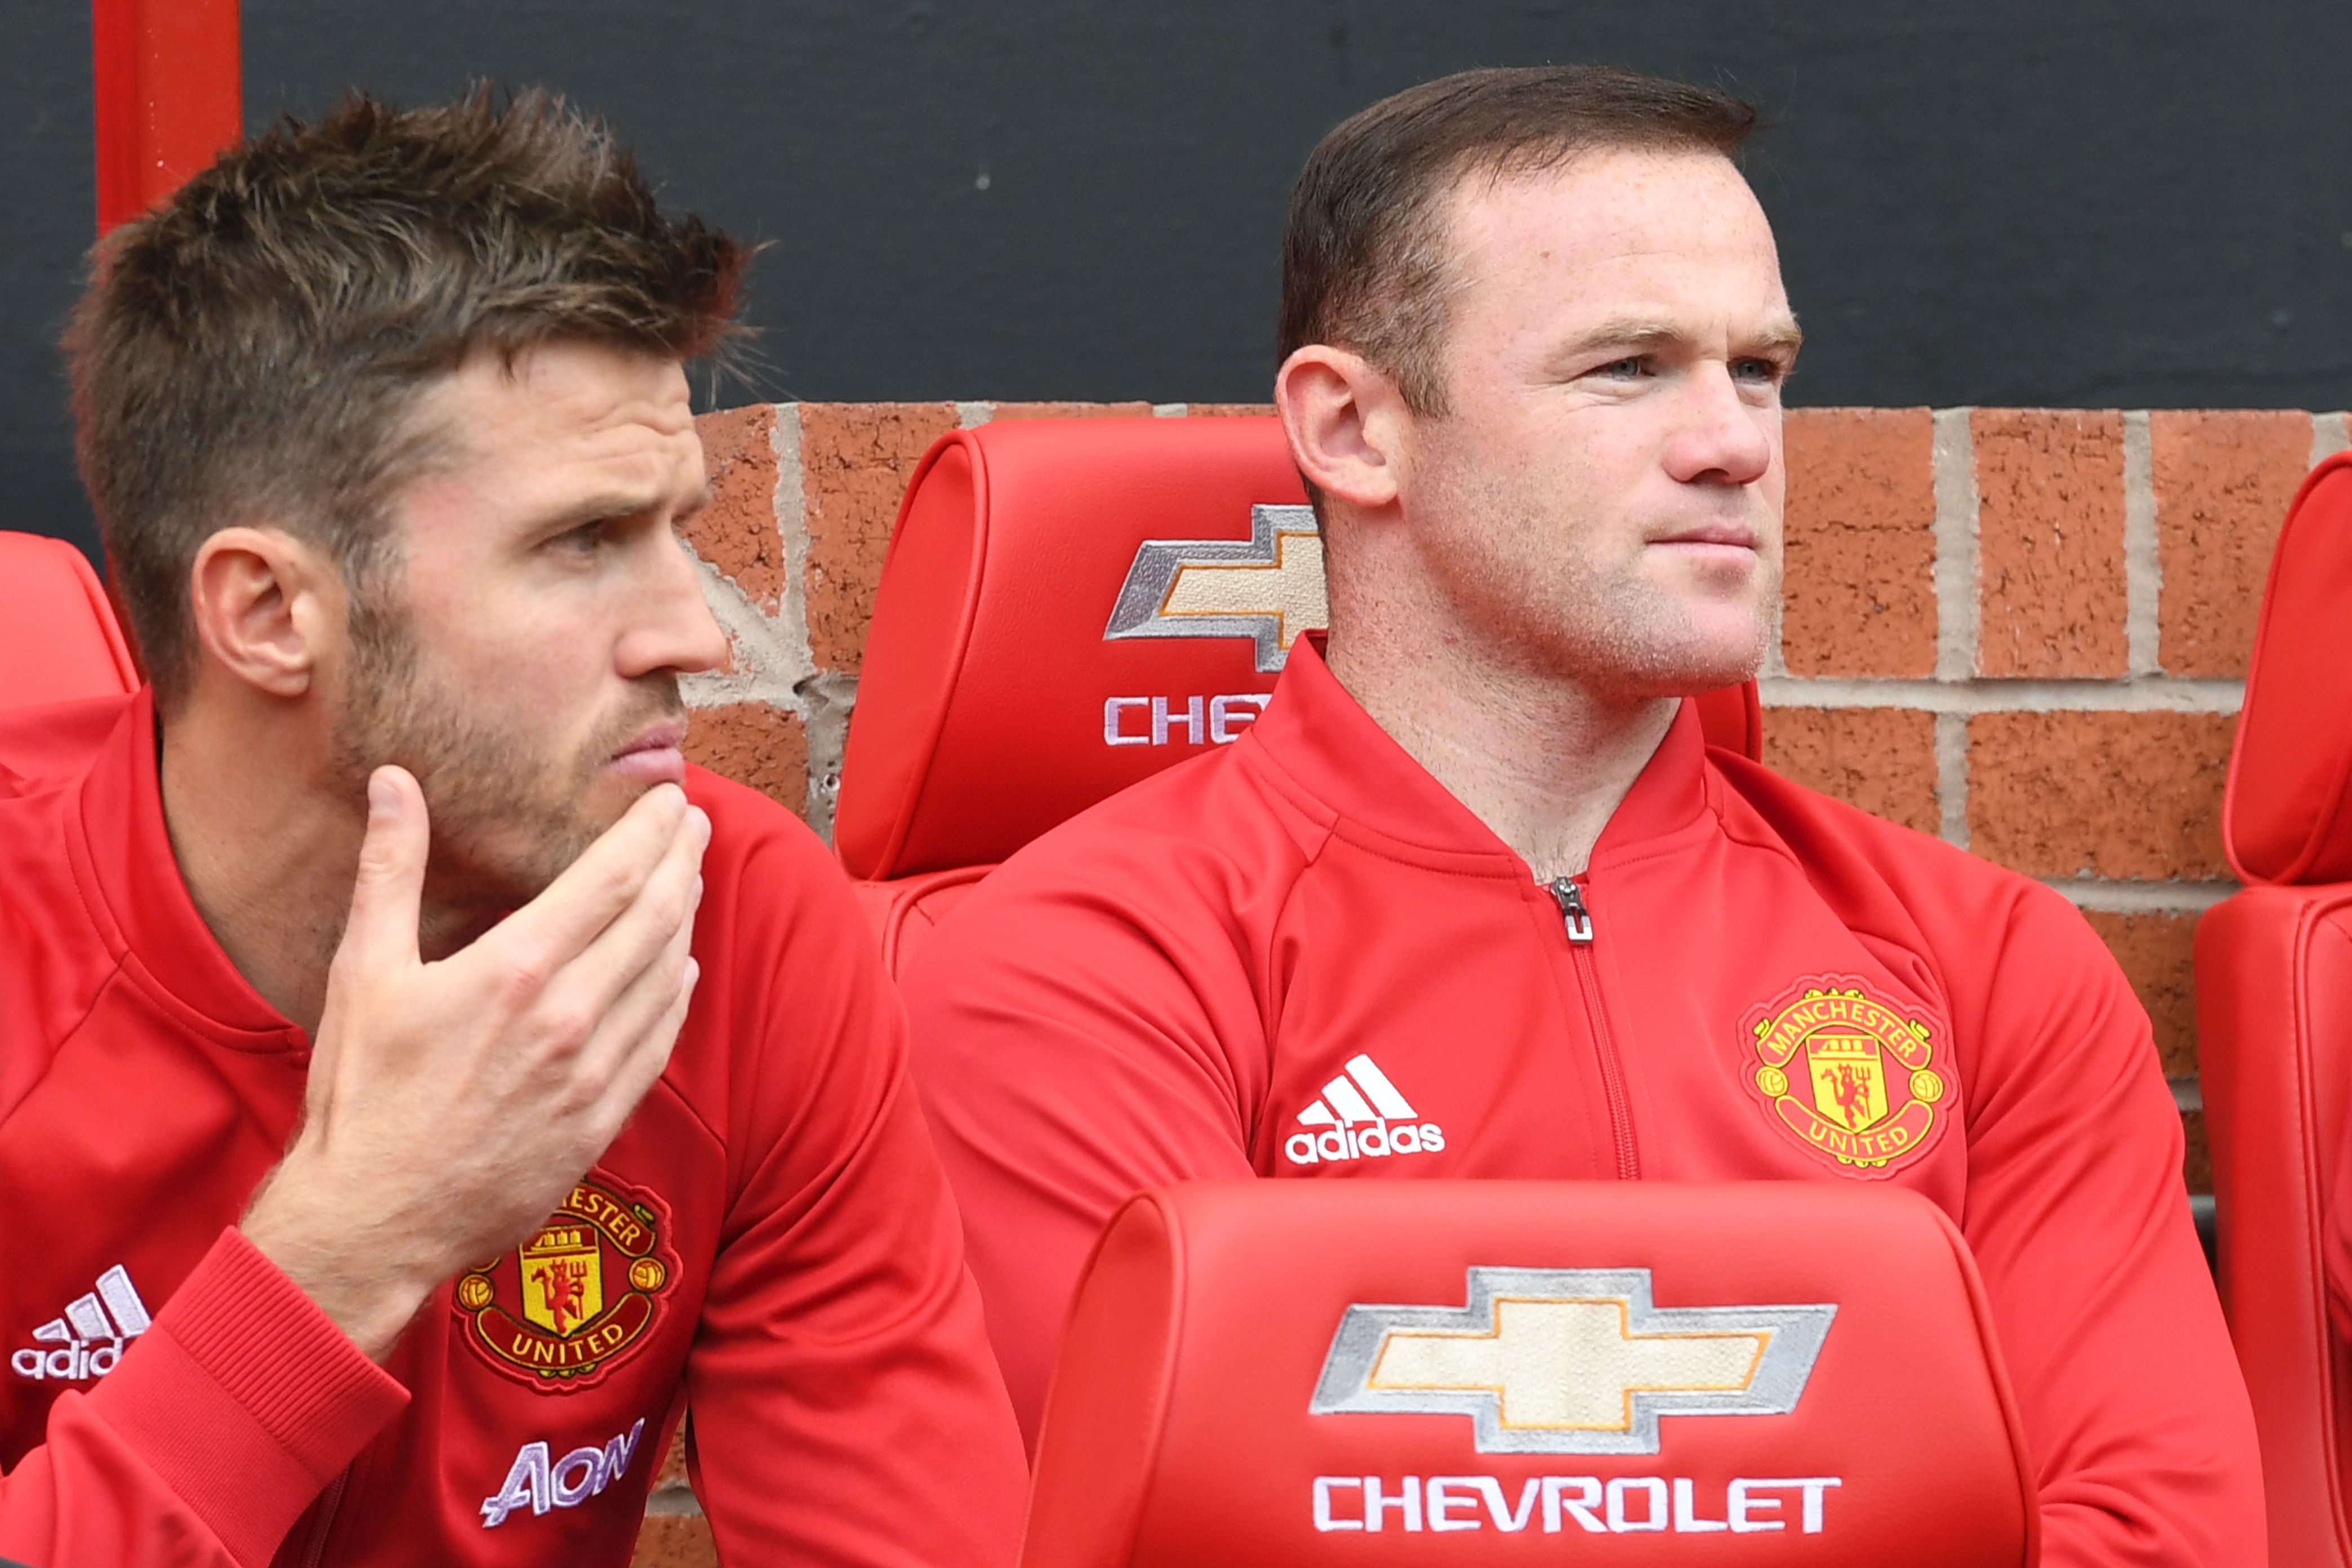 Manchester United's English striker Wayne Rooney (R) sits on the substitutes bench with Manchester United's English midfielder Michael Carrick (L) during the English Premier League football match between Manchester United and Leicester City at Old Trafford in Manchester, north west England, on September 24, 2016. / AFP / ANTHONY DEVLIN / RESTRICTED TO EDITORIAL USE. No use with unauthorized audio, video, data, fixture lists, club/league logos or 'live' services. Online in-match use limited to 75 images, no video emulation. No use in betting, games or single club/league/player publications.  /         (Photo credit should read ANTHONY DEVLIN/AFP/Getty Images)